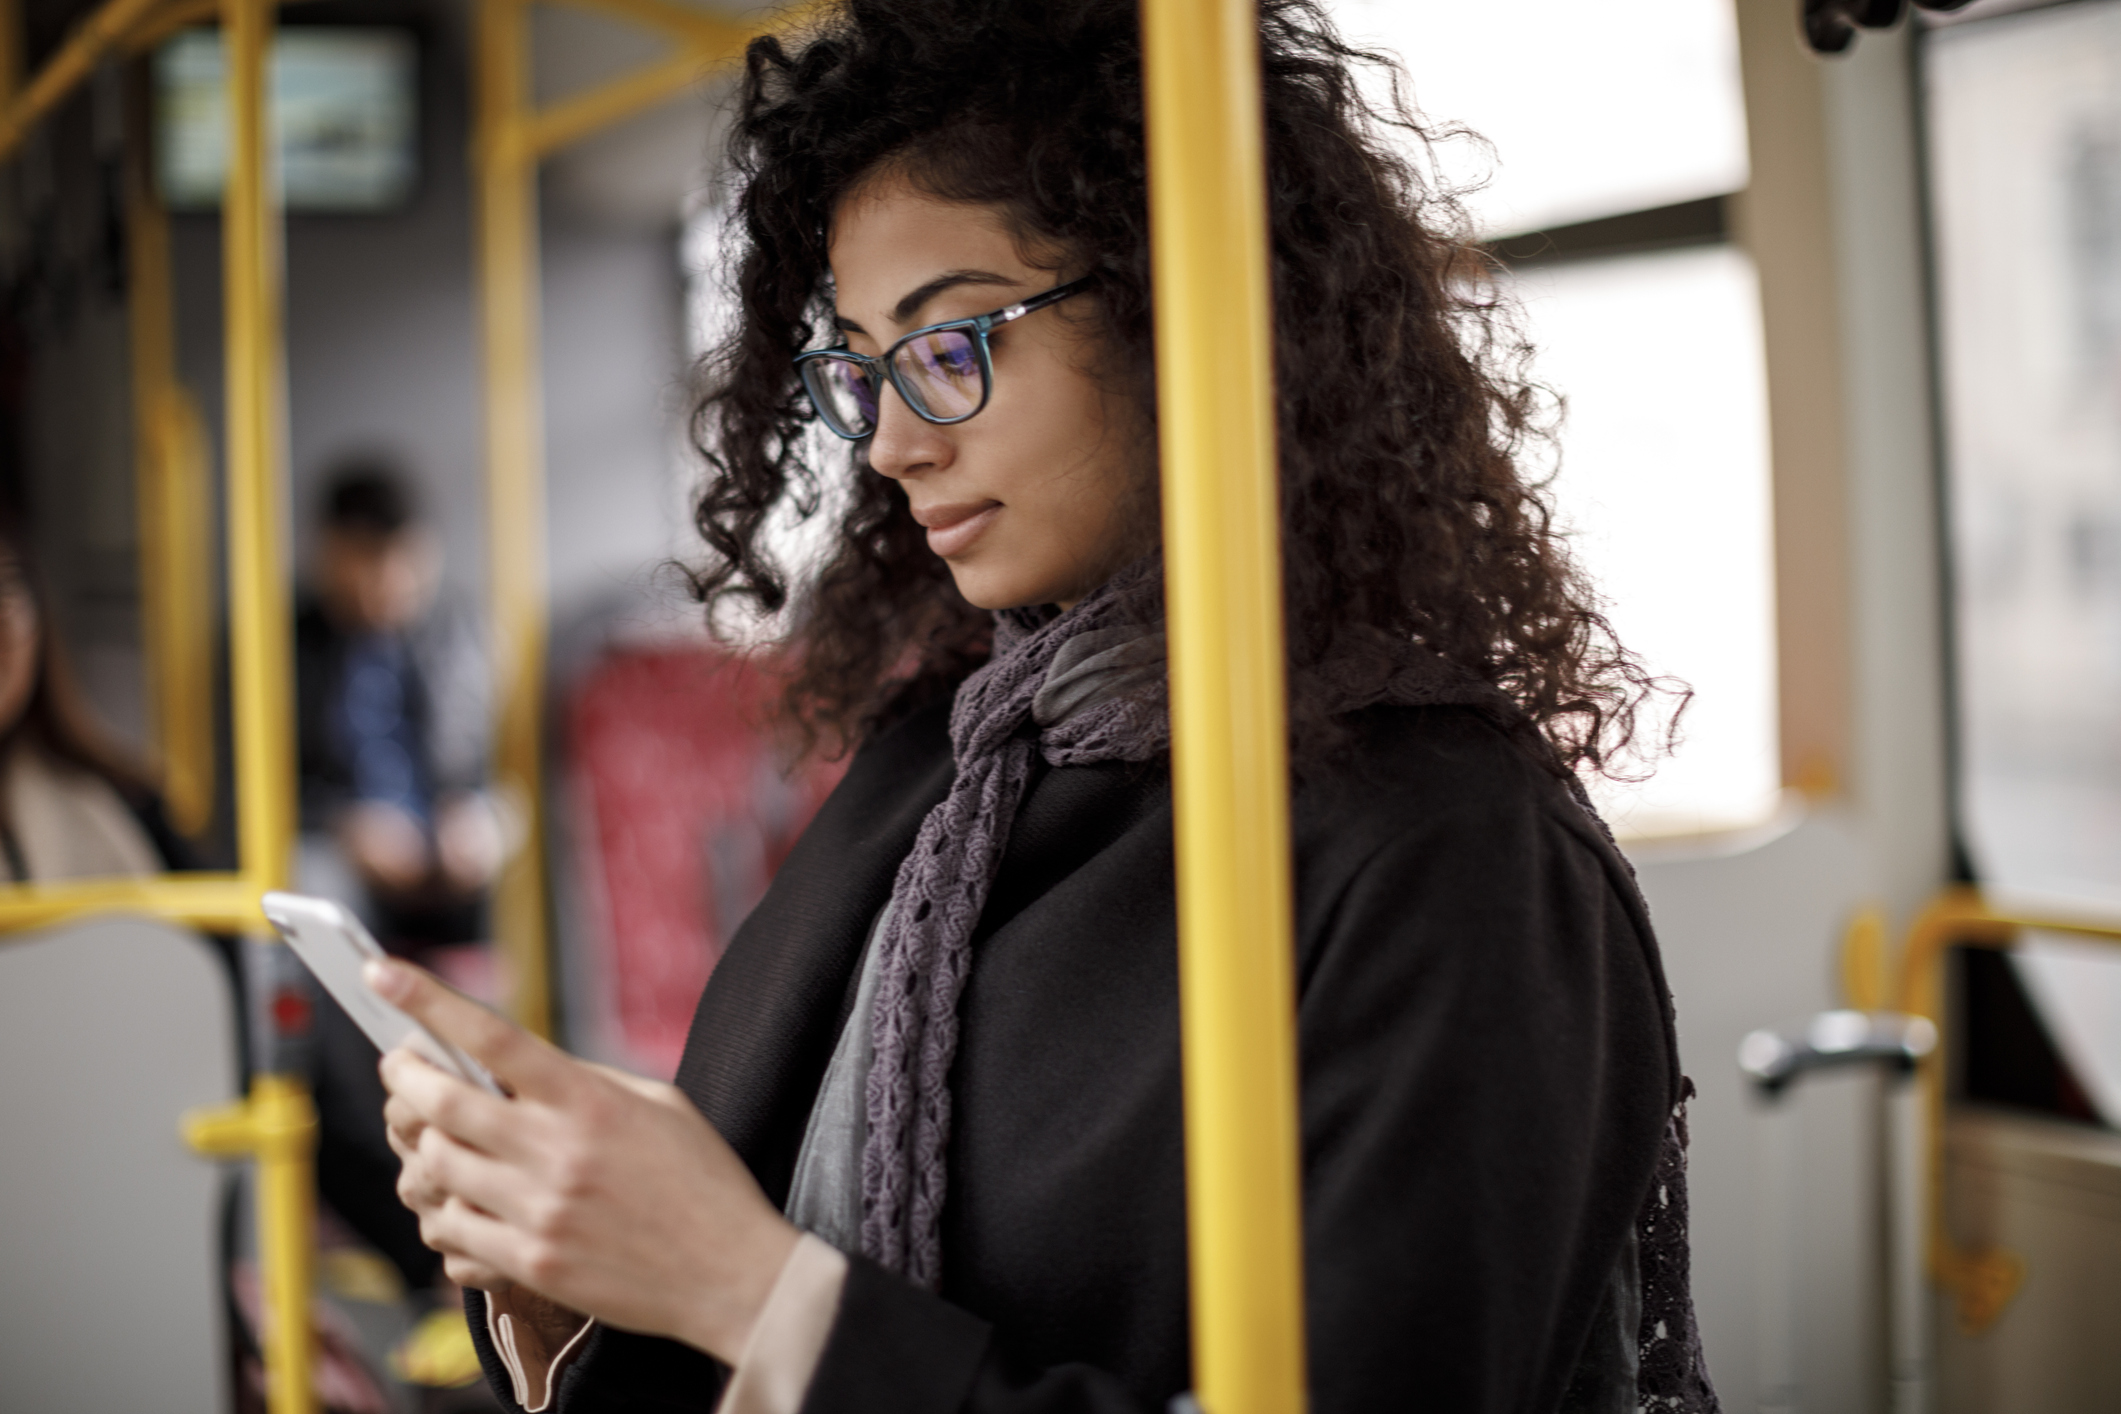 Woman commuting on a bus while looking at her phone.